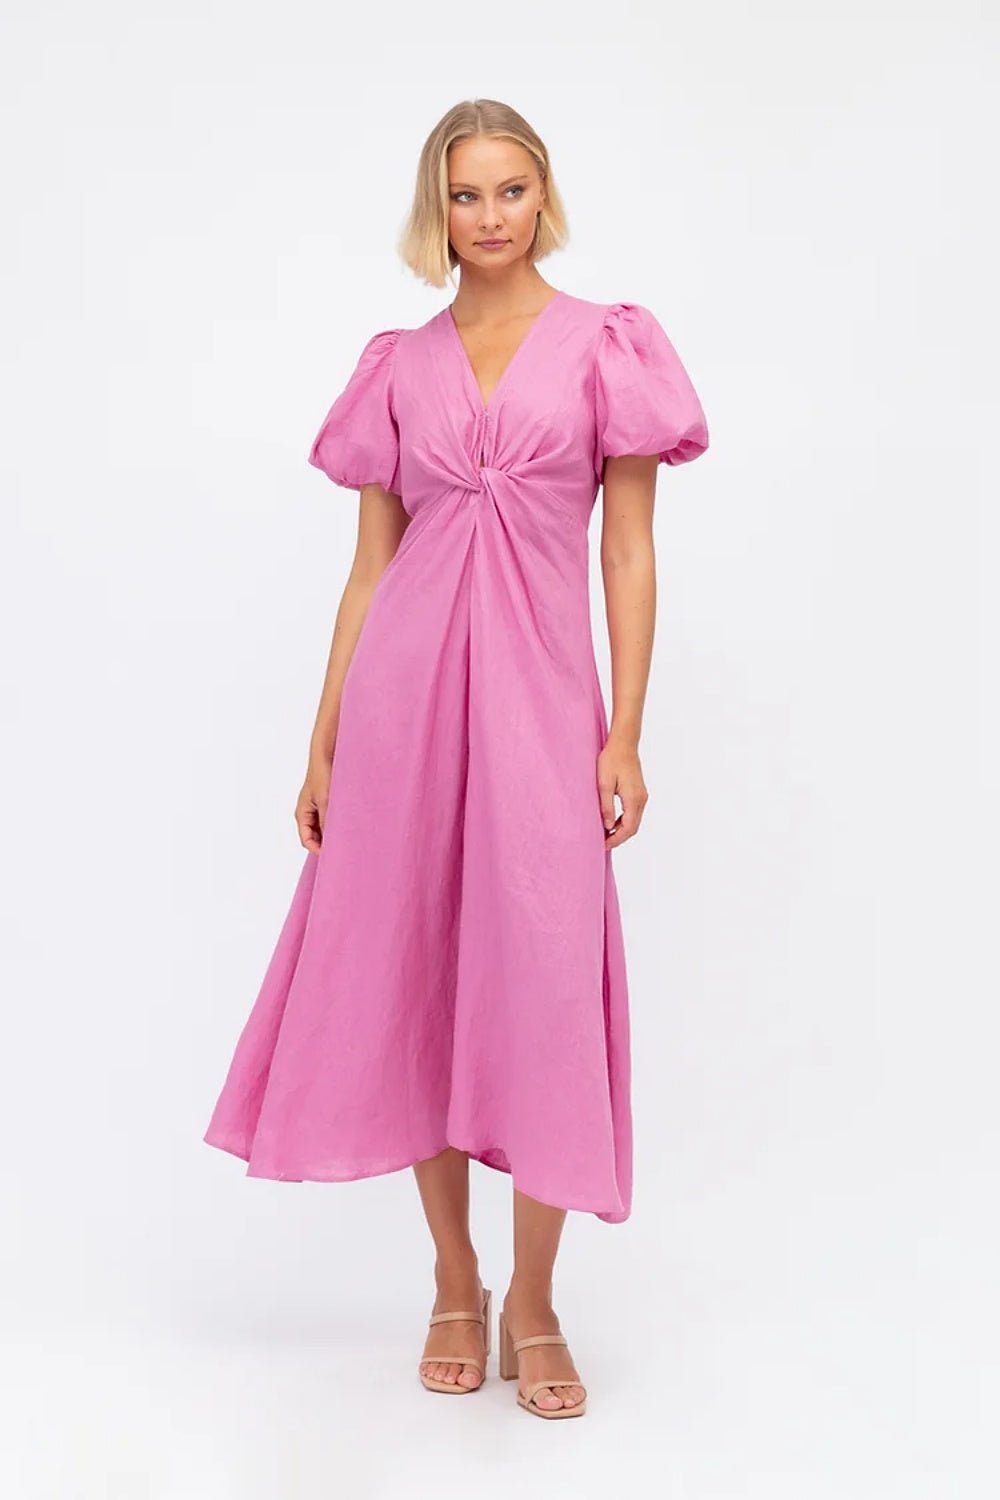 THE LONG LUNCH DRESS PINK